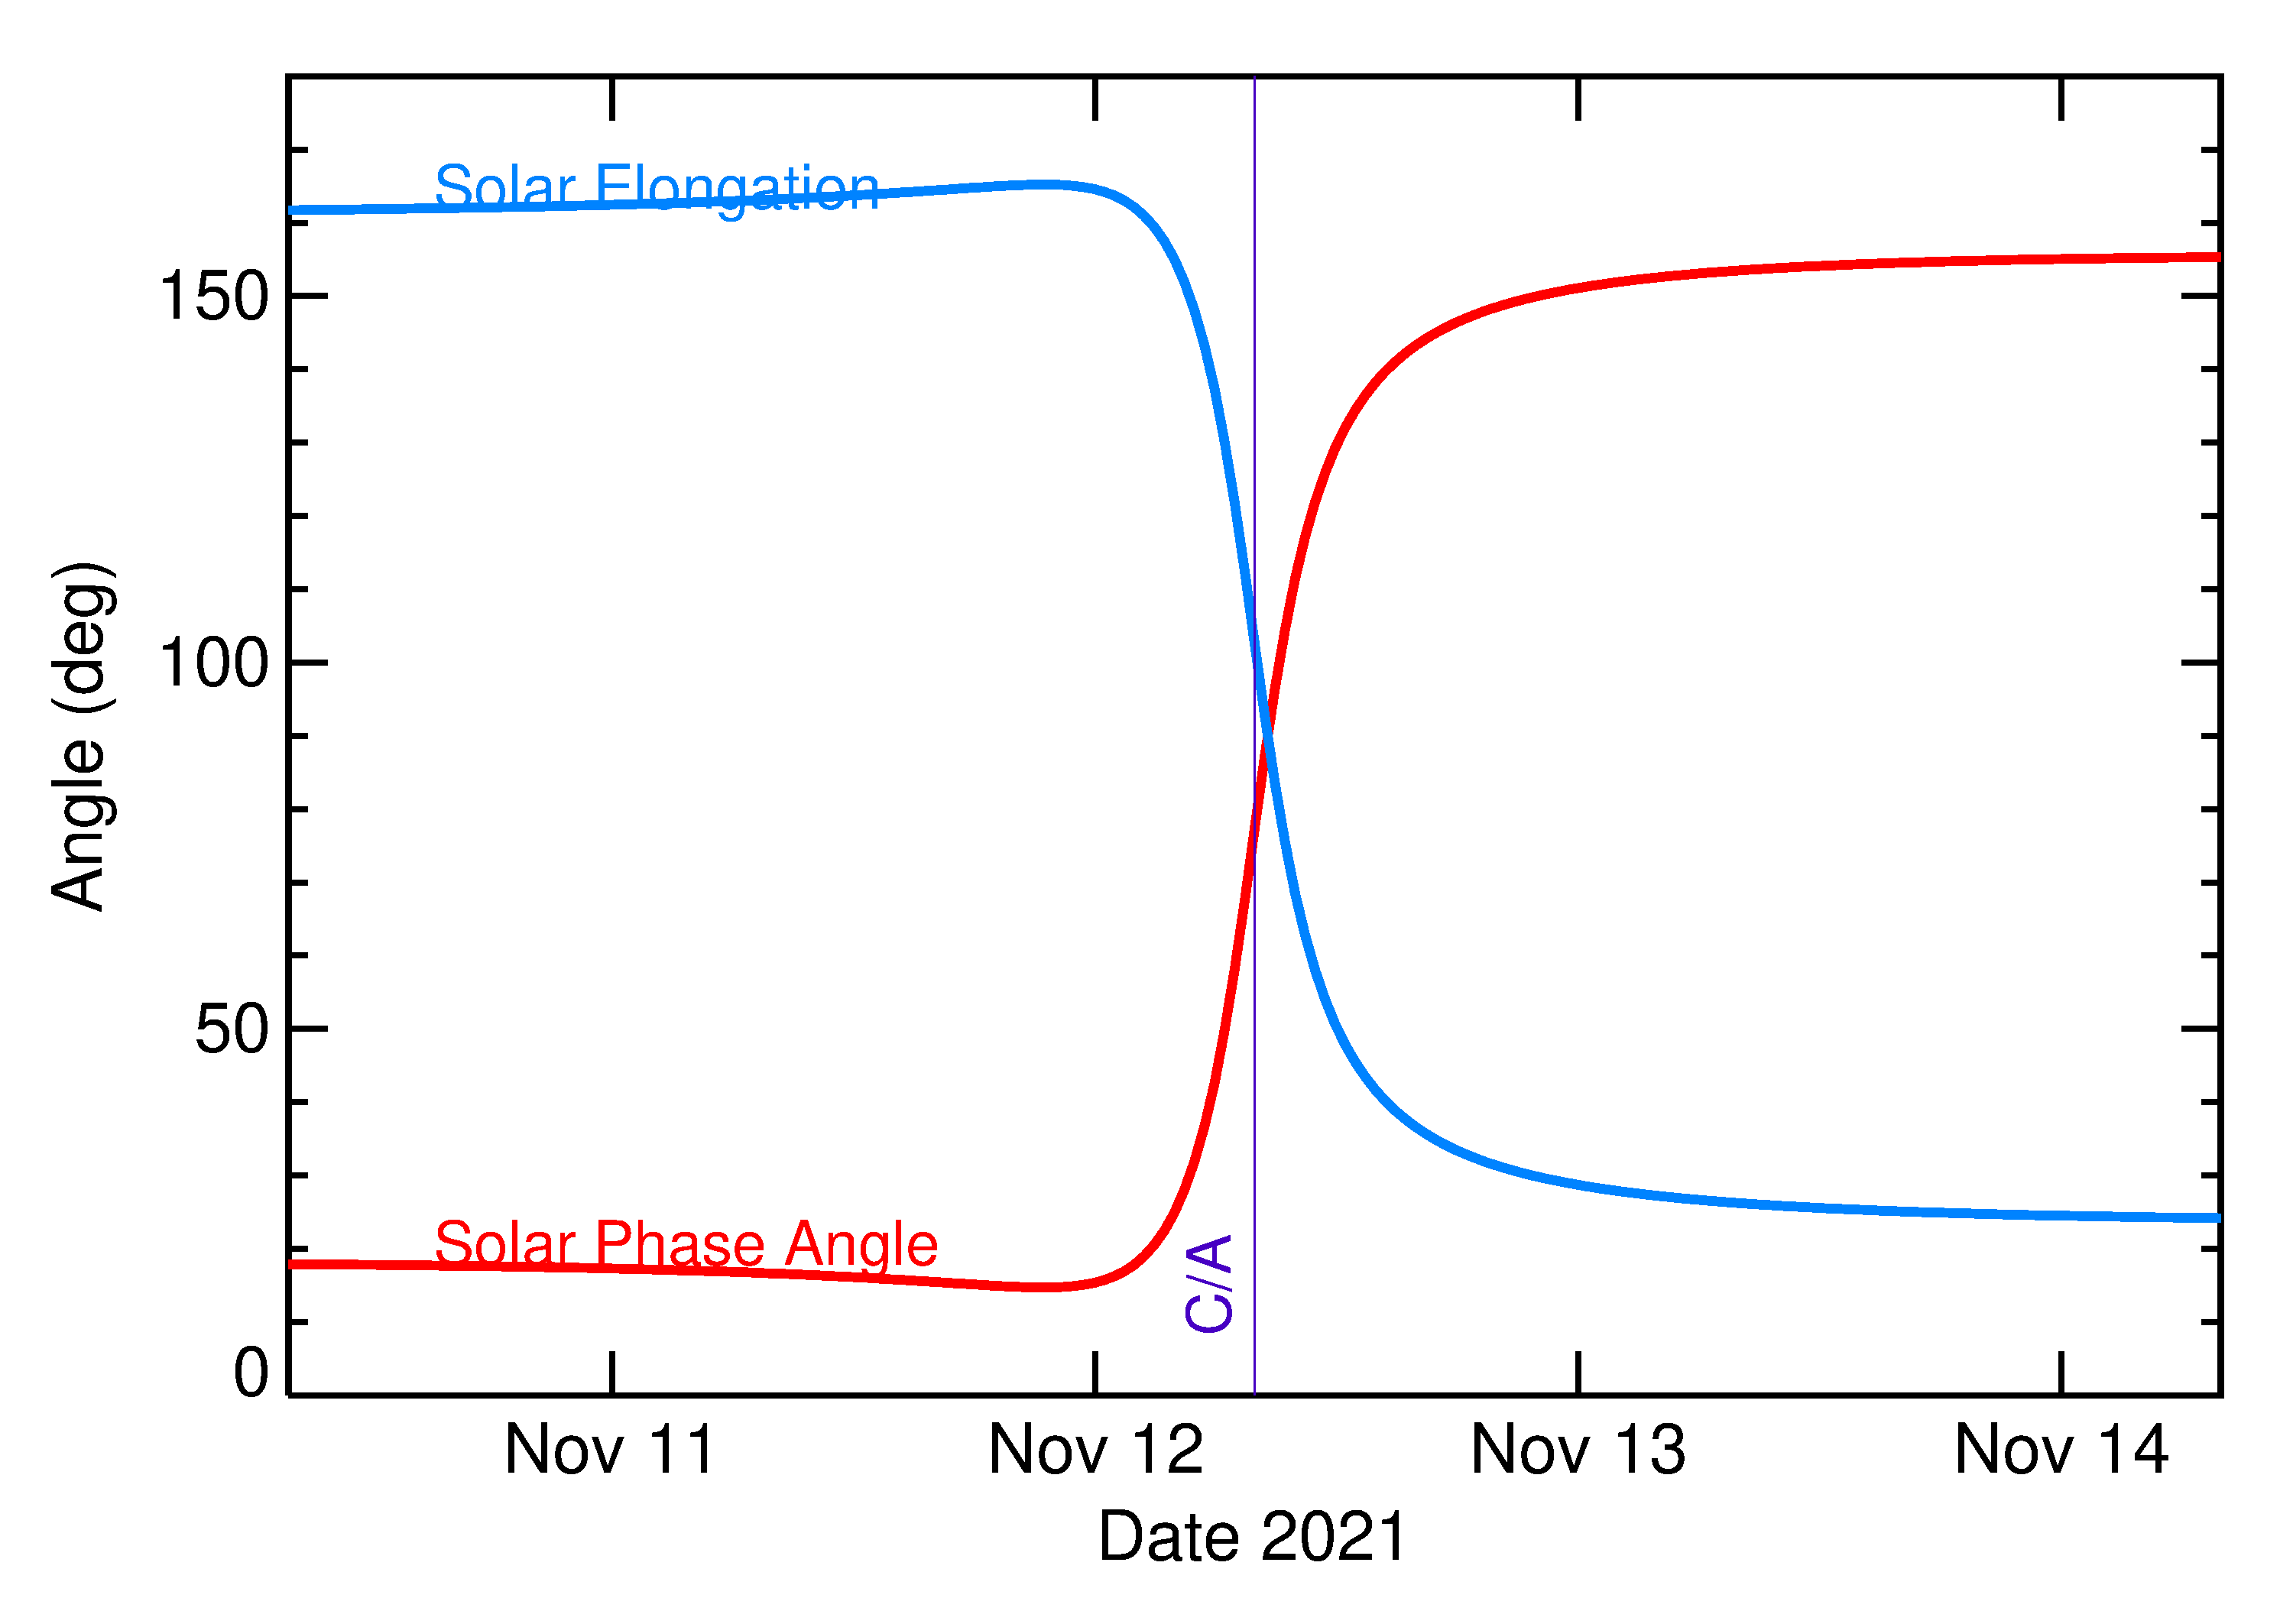 Solar Elongation and Solar Phase Angle of 2021 VC7 in the days around closest approach